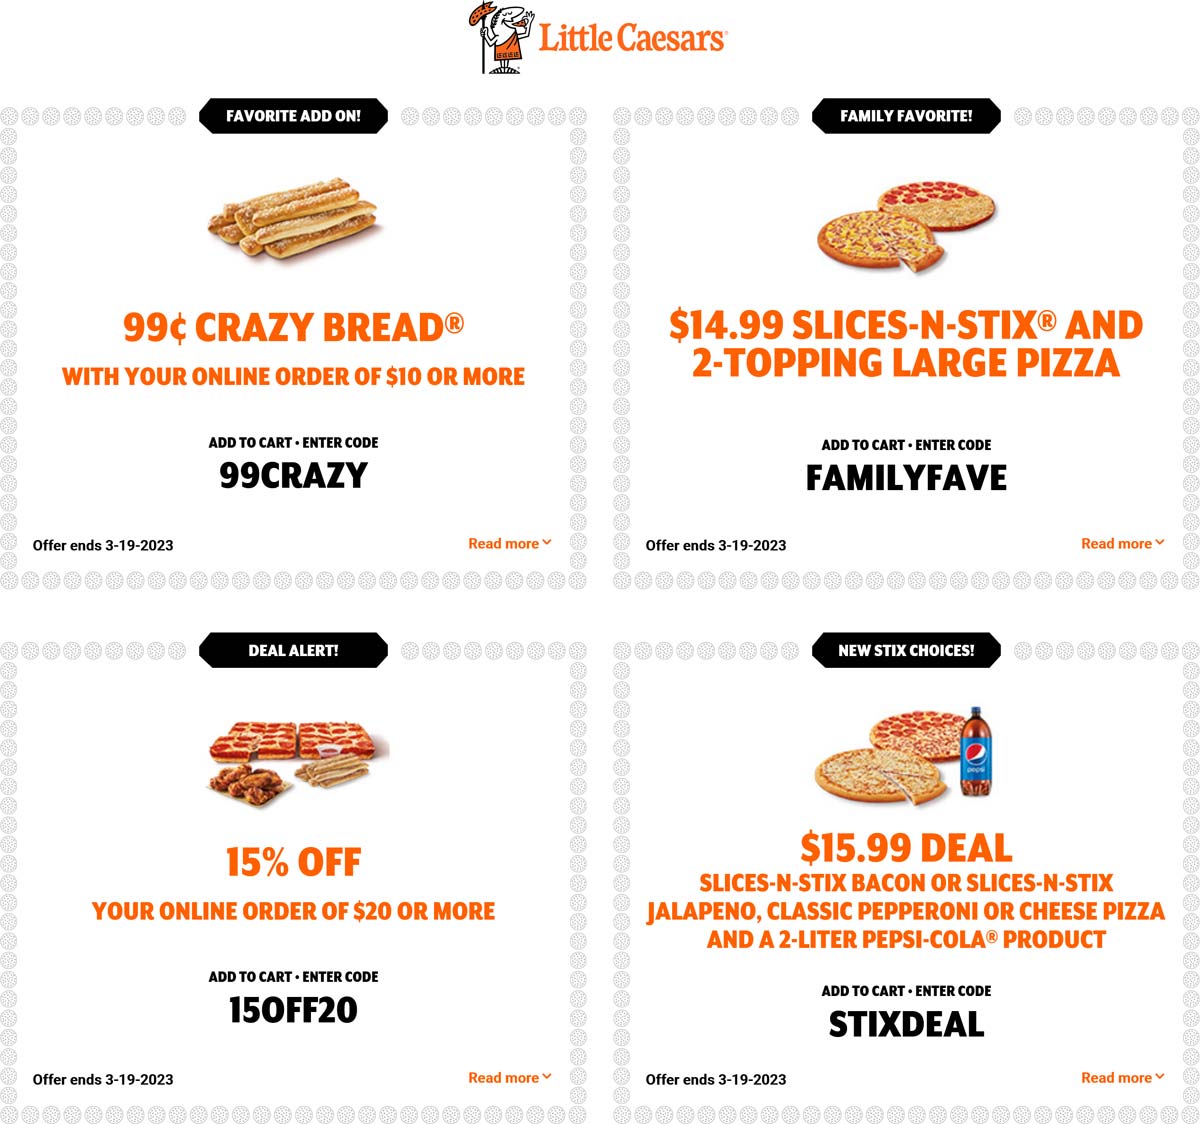 Little Caesars restaurants Coupon  15% off $20 & more at Little Caesars pizza via promo code 15OFF20 #littlecaesars 